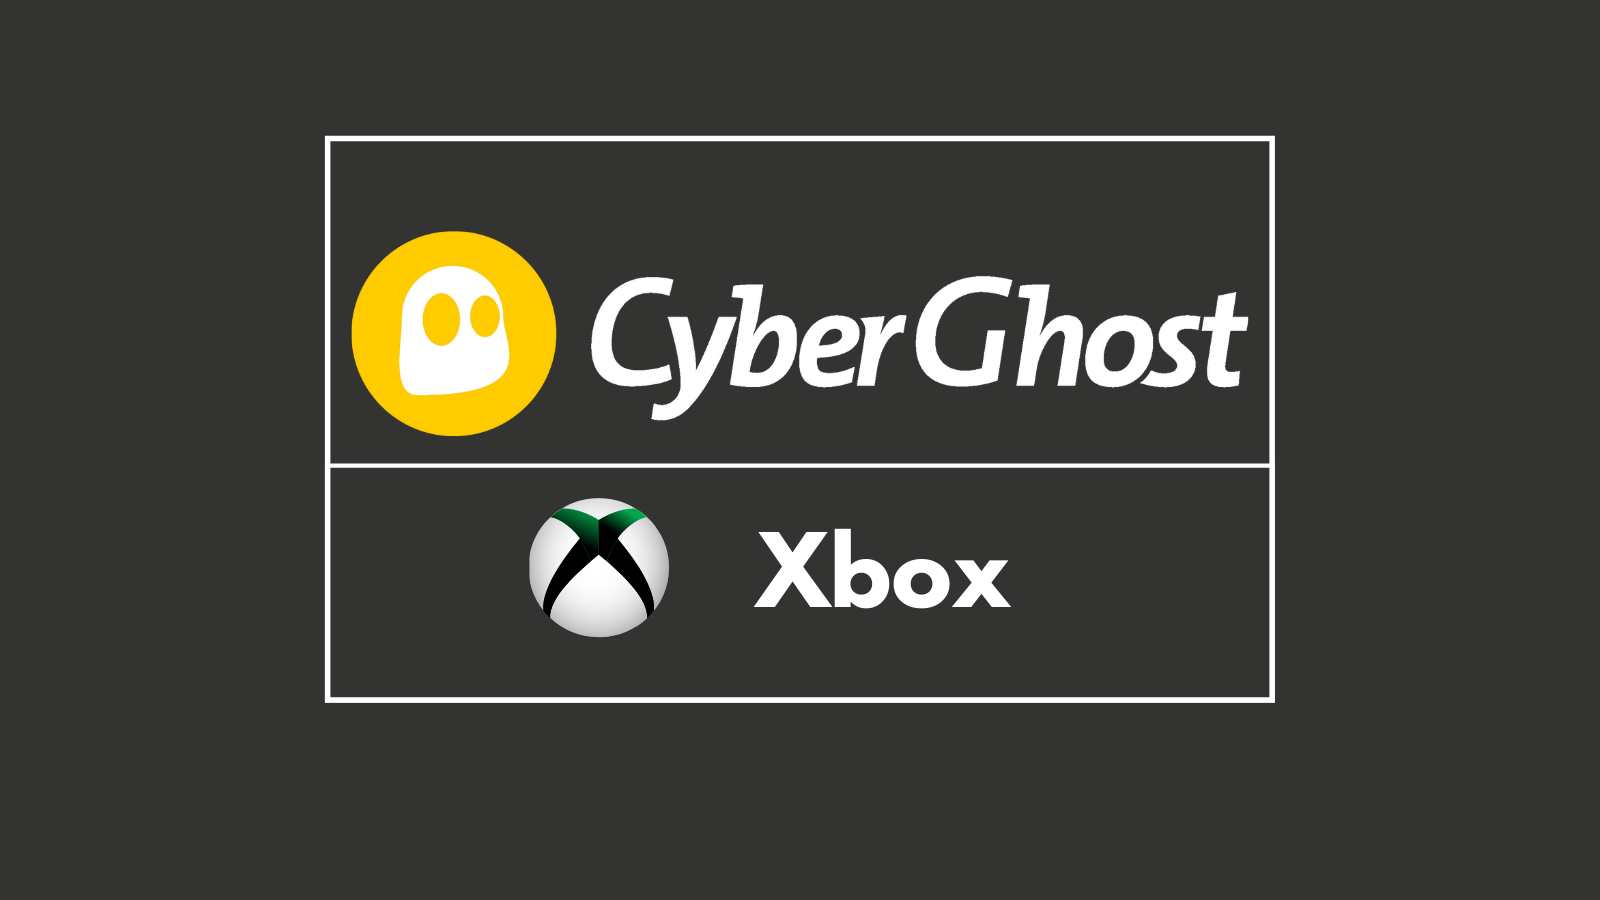 How to Download, Install & Use CyberGhost VPN on Xbox?